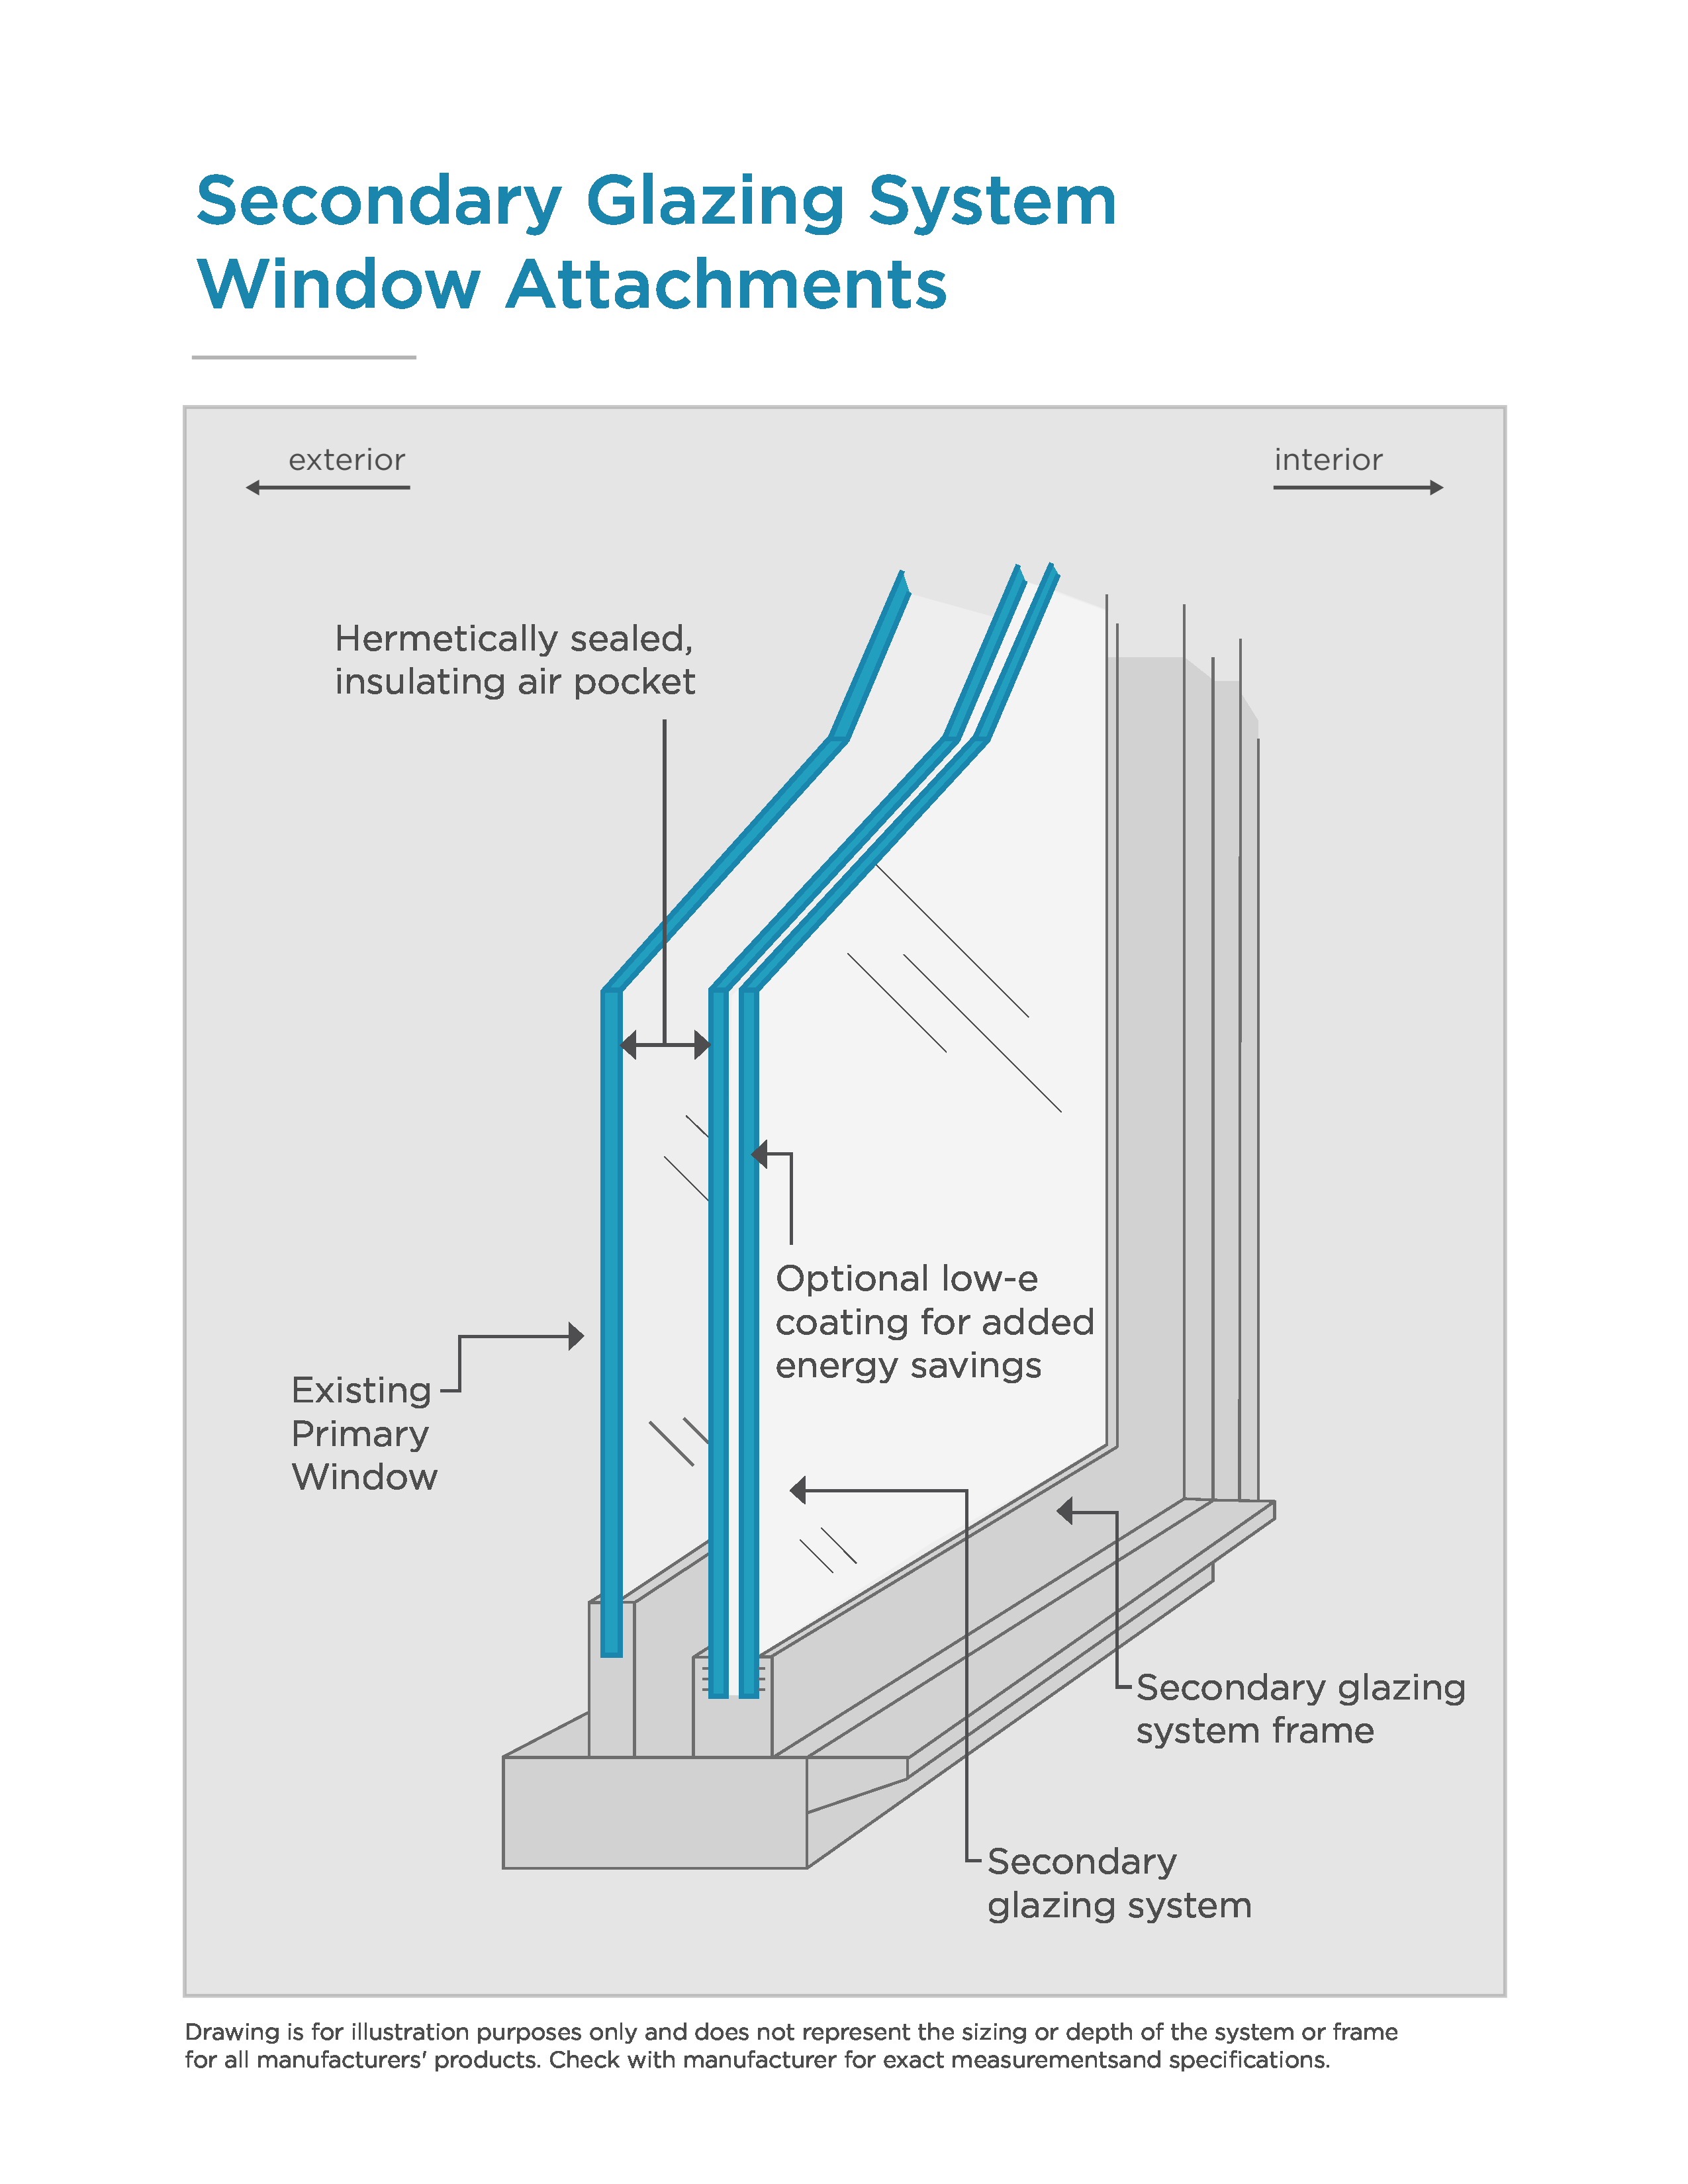 Simplified illustration of an insulated glass unit and an insulated